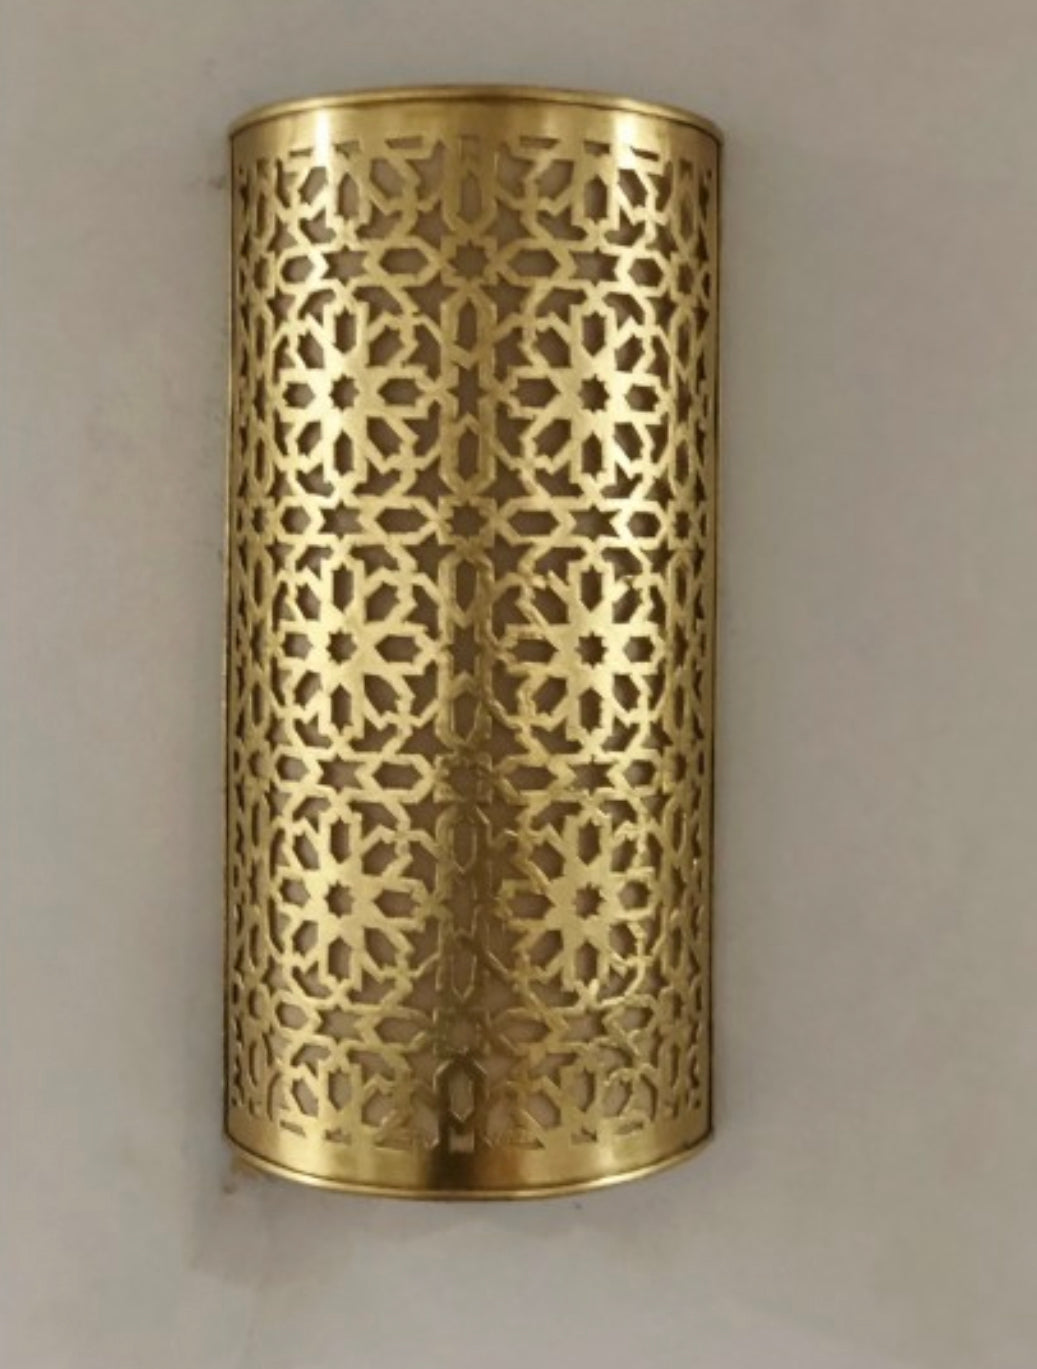 Set of 2 Moroccan Wall Sconces - Ref. 1314